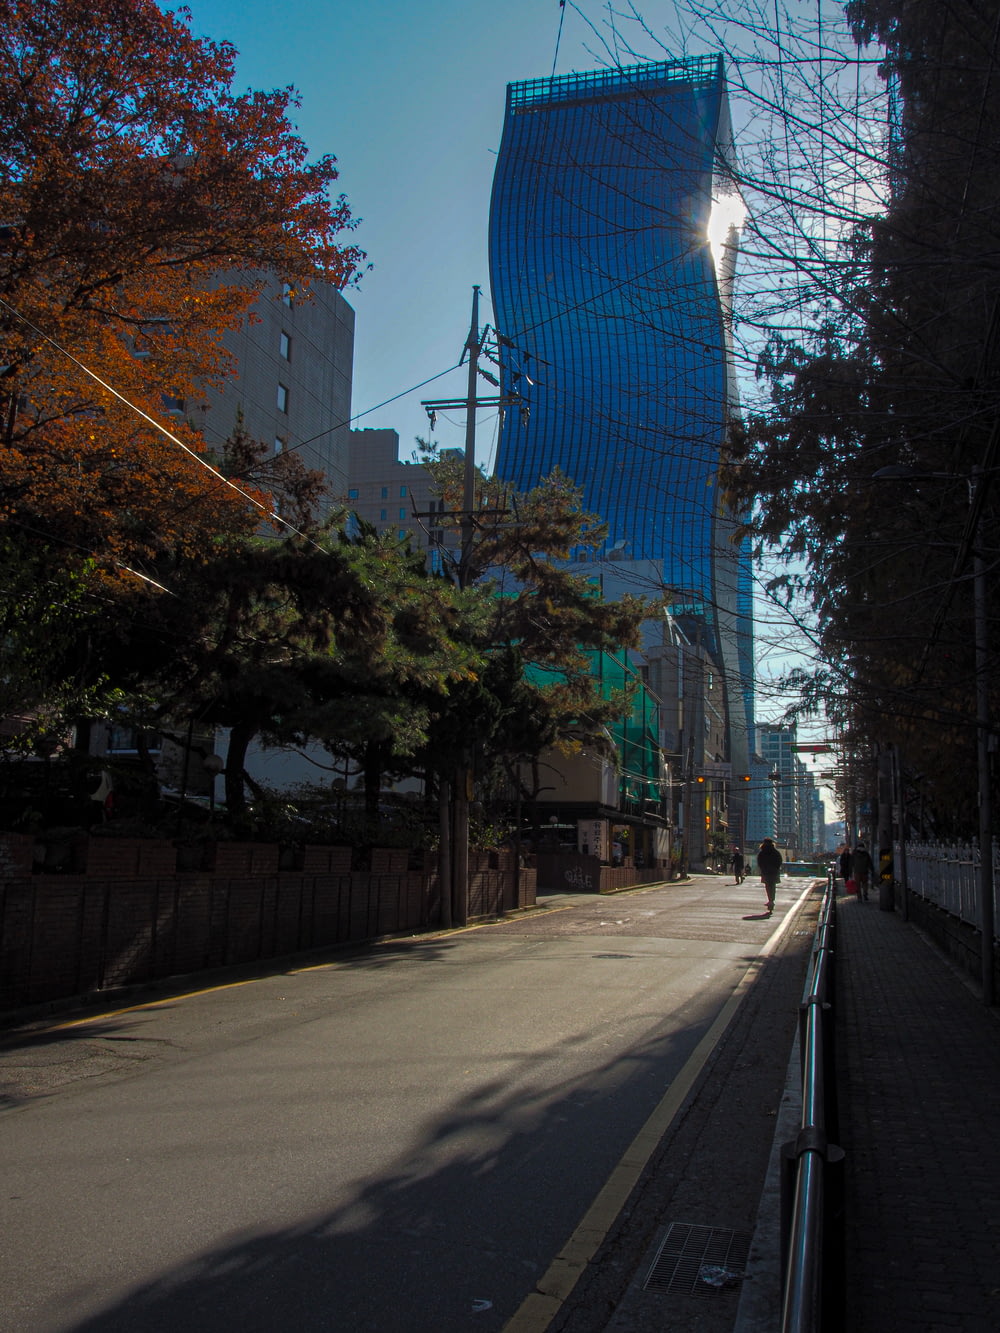 gray concrete road between trees and buildings during daytime